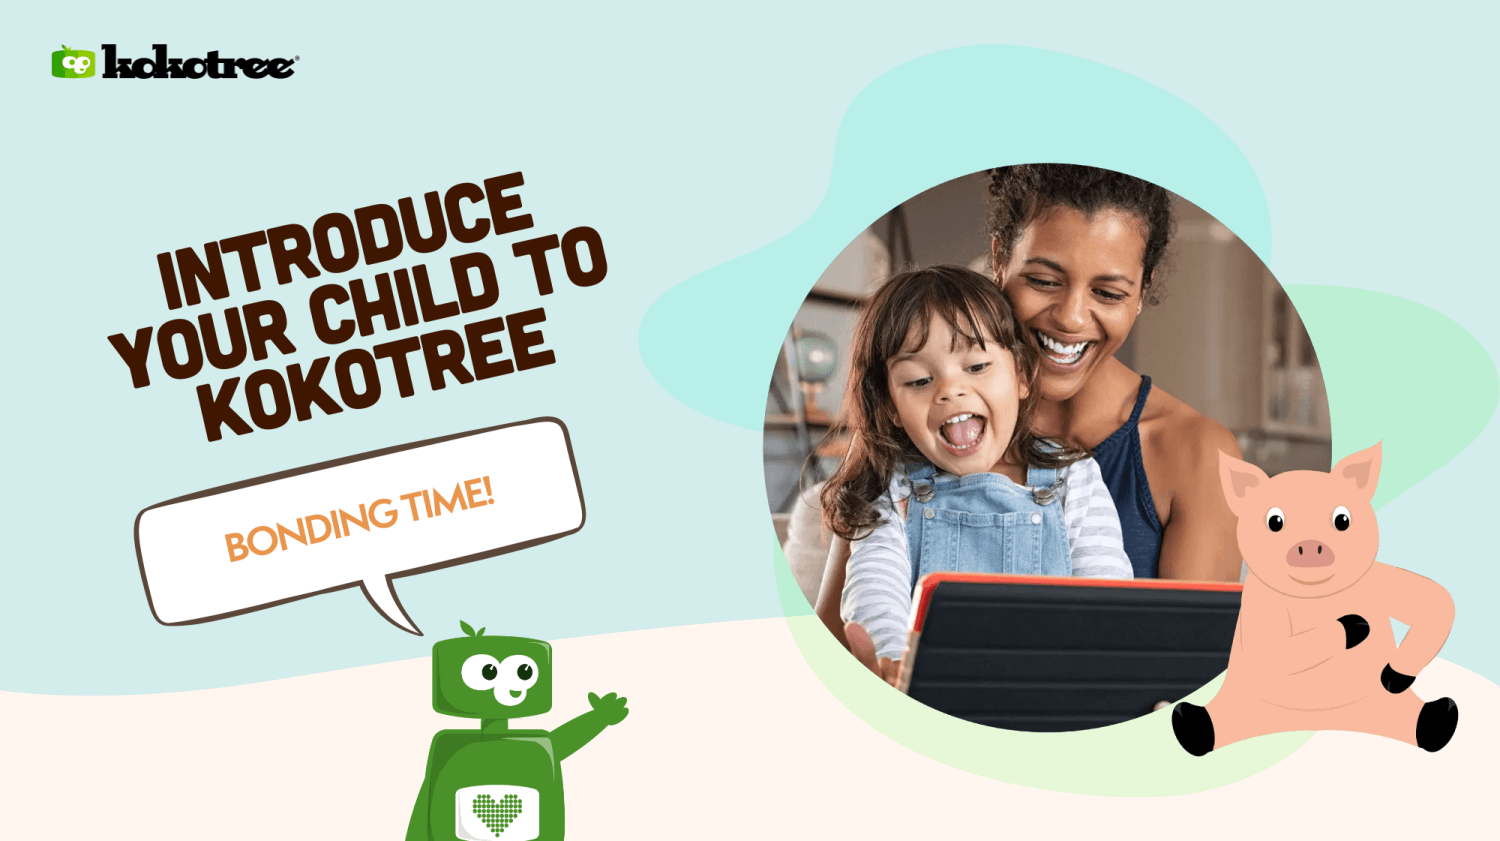 Introduce Kokotree to Your Child